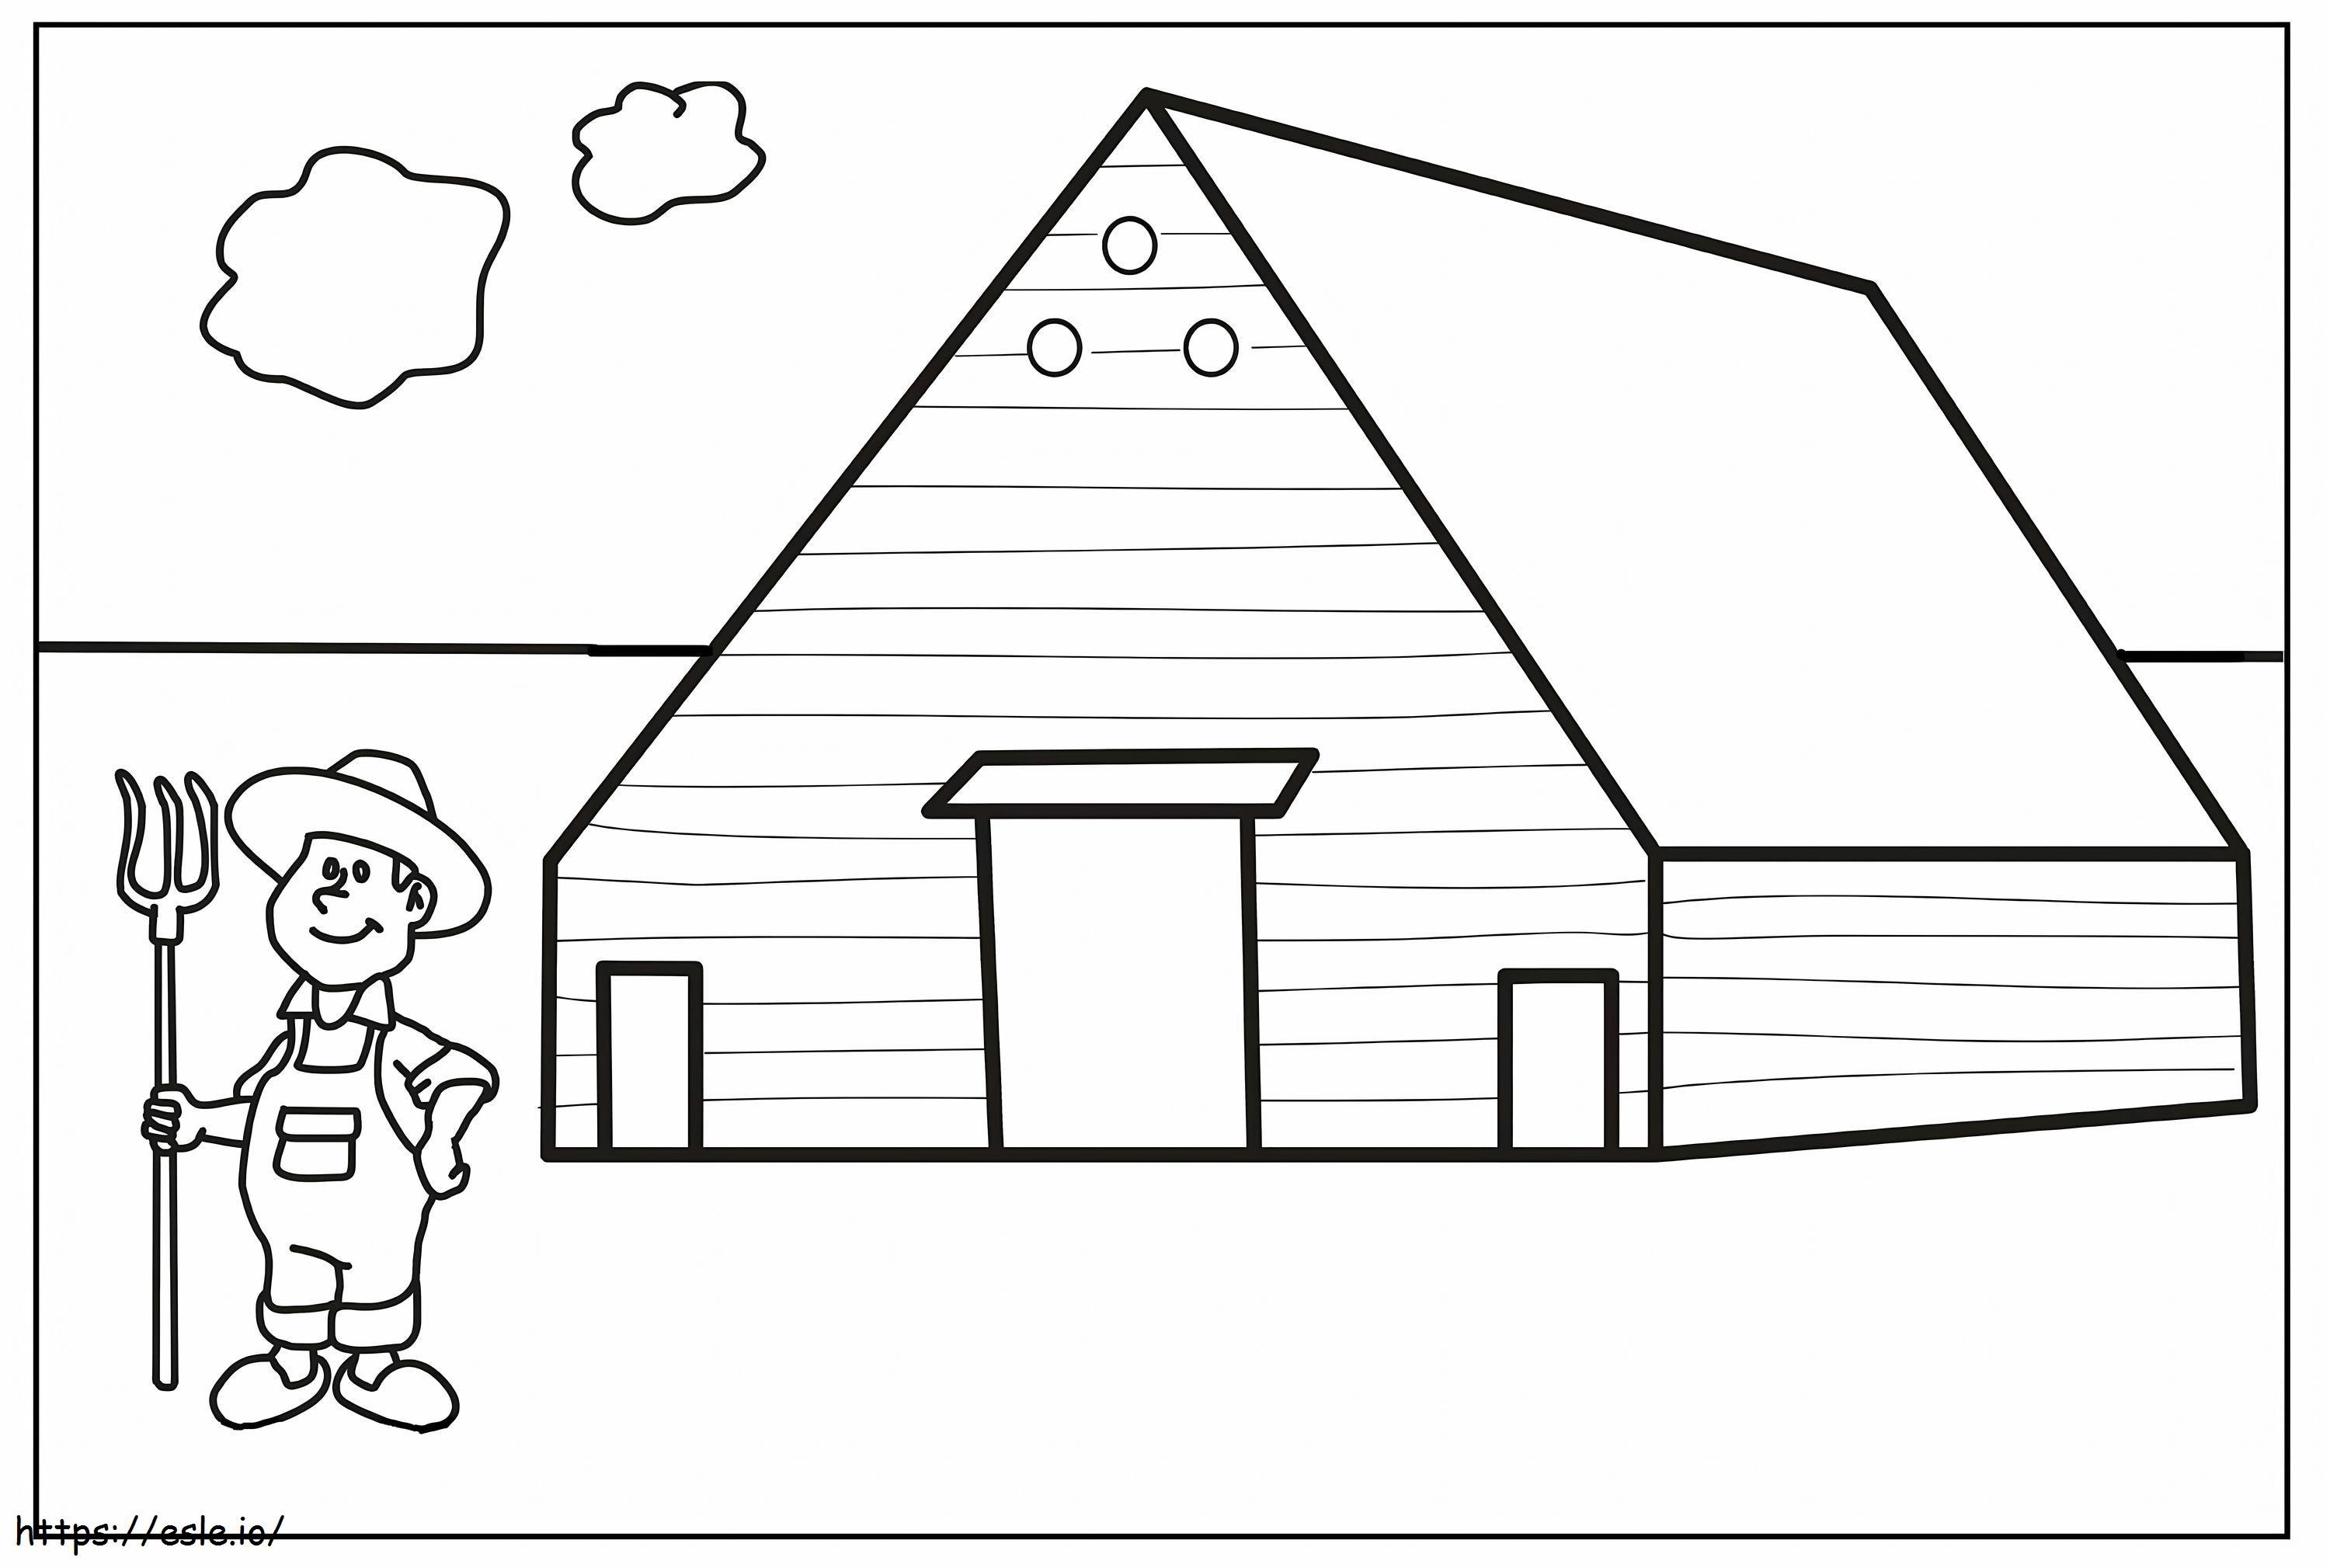 Farmer And House coloring page